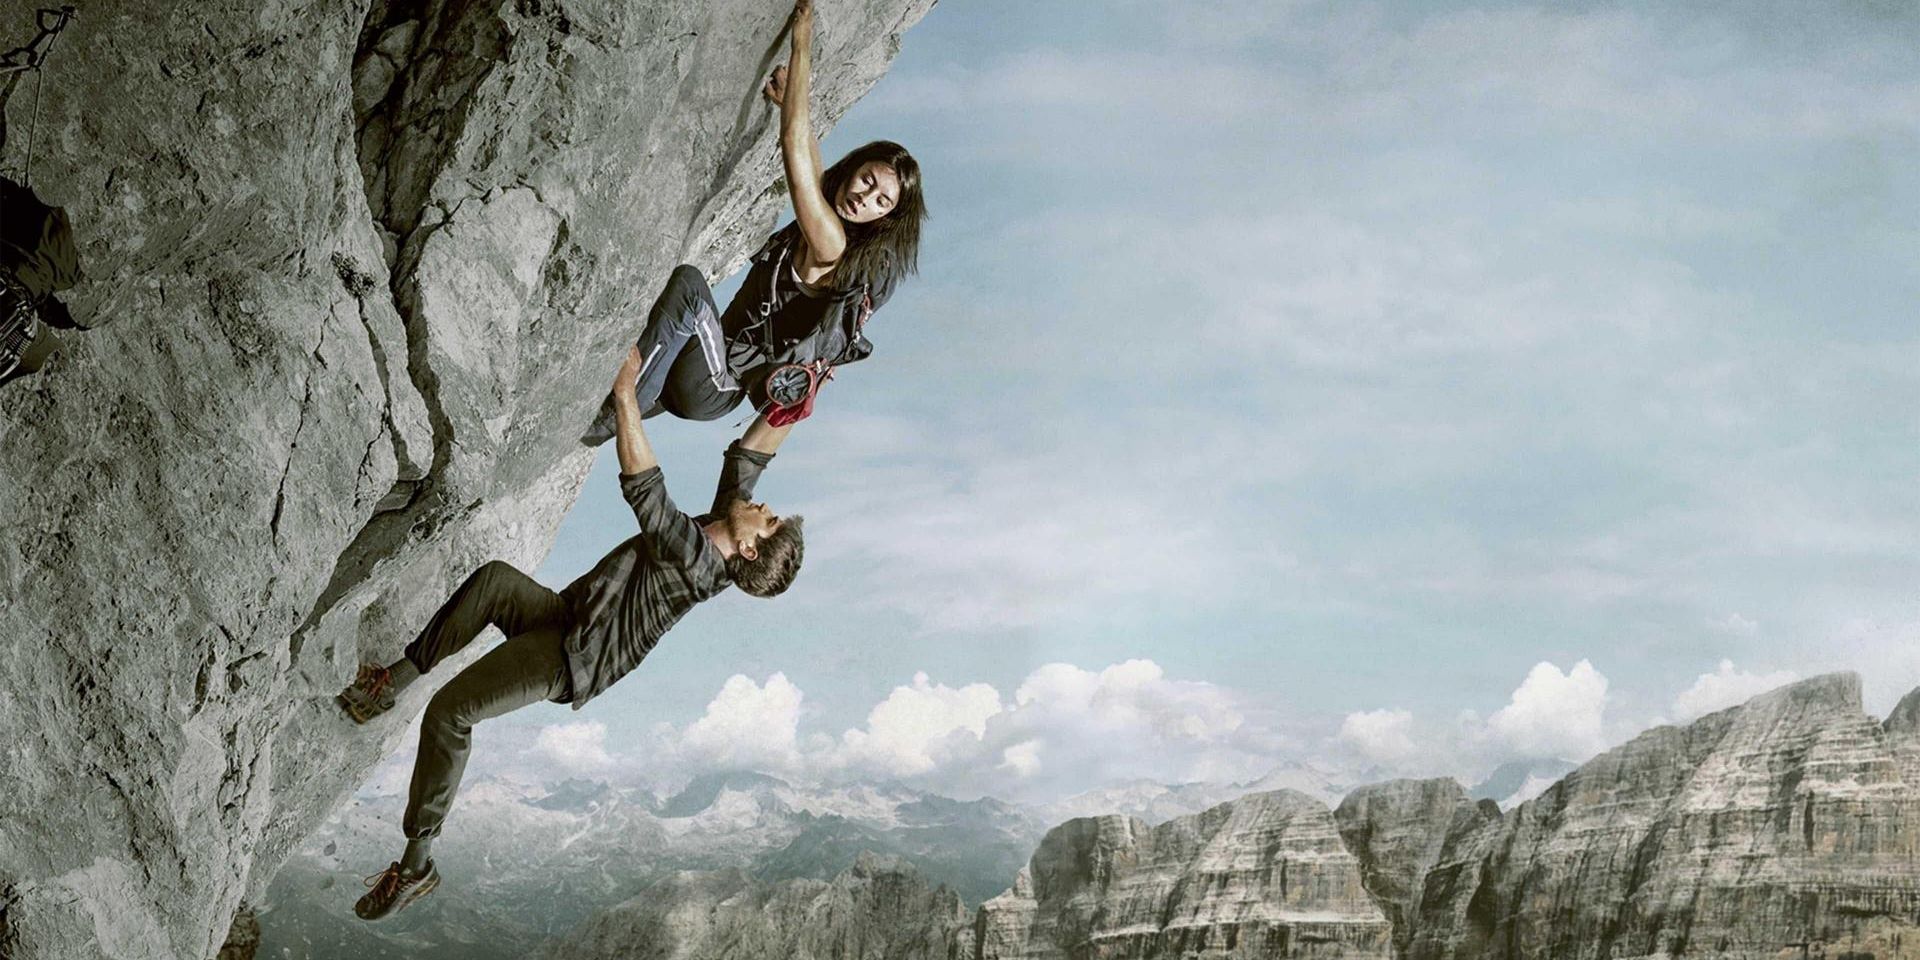 Two rock climbers on vertical cliff